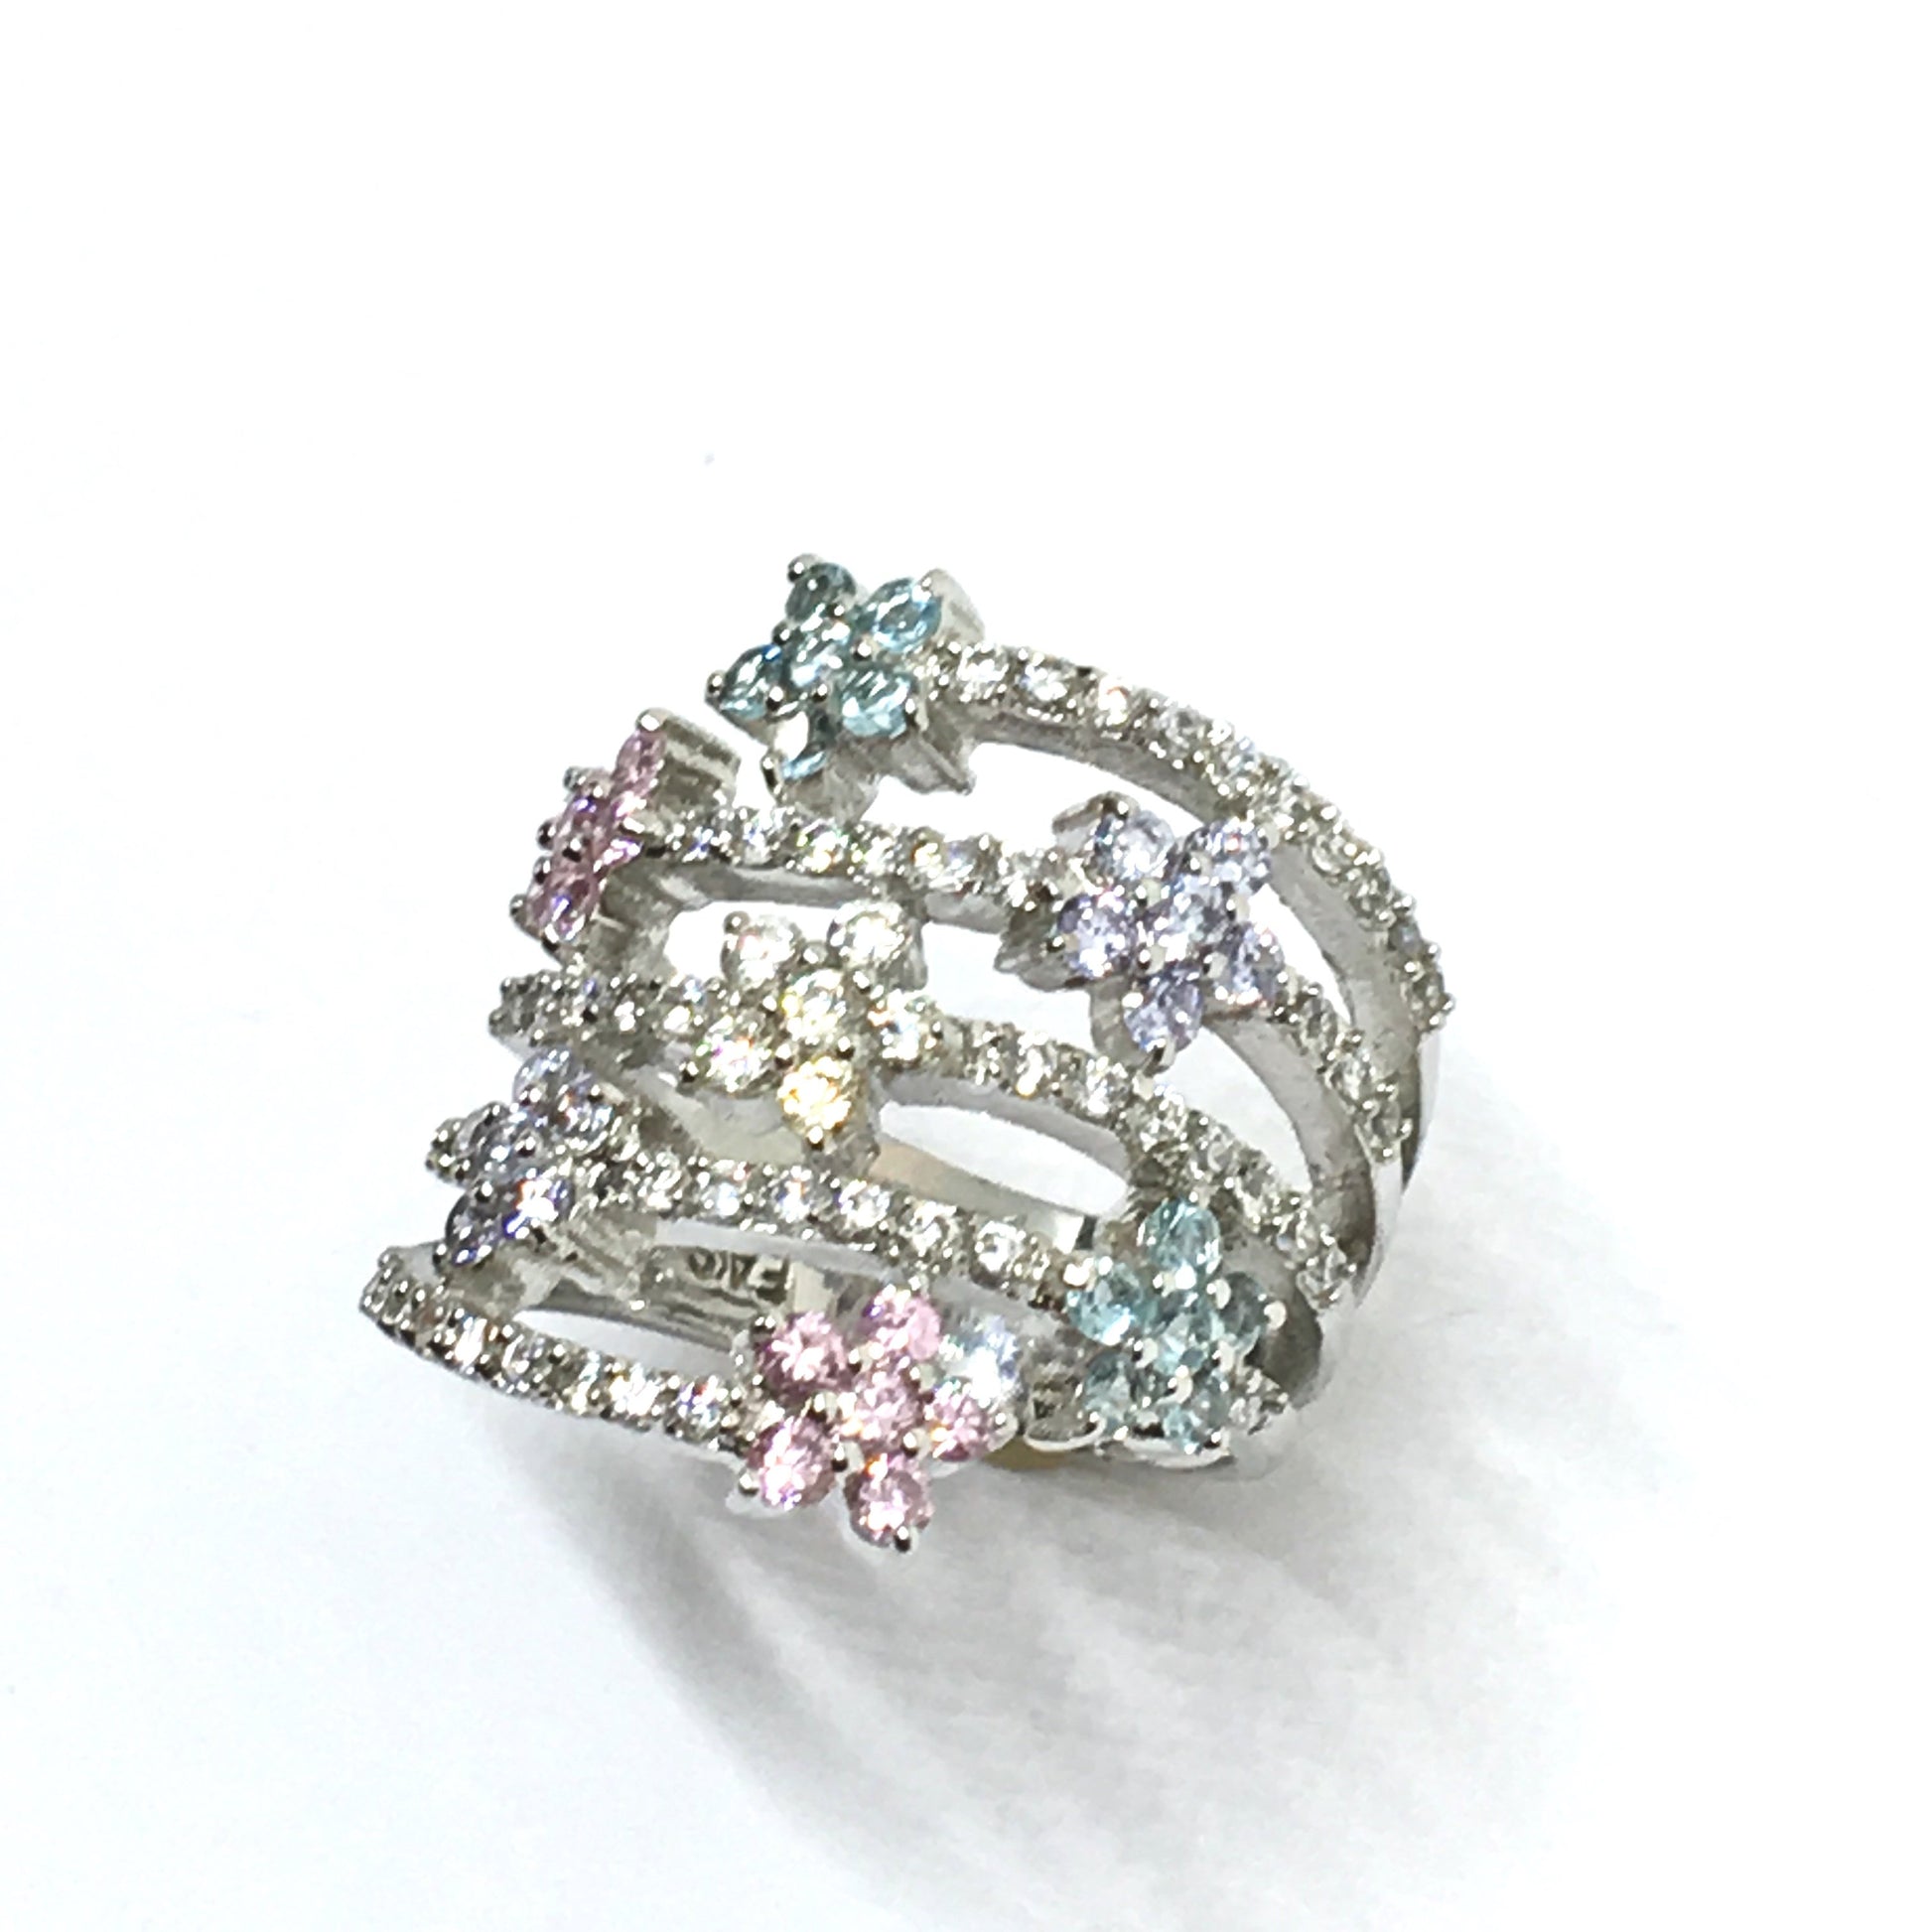 Ring - Fancy Stacking Blue Pink Cz Flower Multi Stone Wide Band Ring - Womens Sterling Silver Ring - Cocktail Ring - Statement Ring